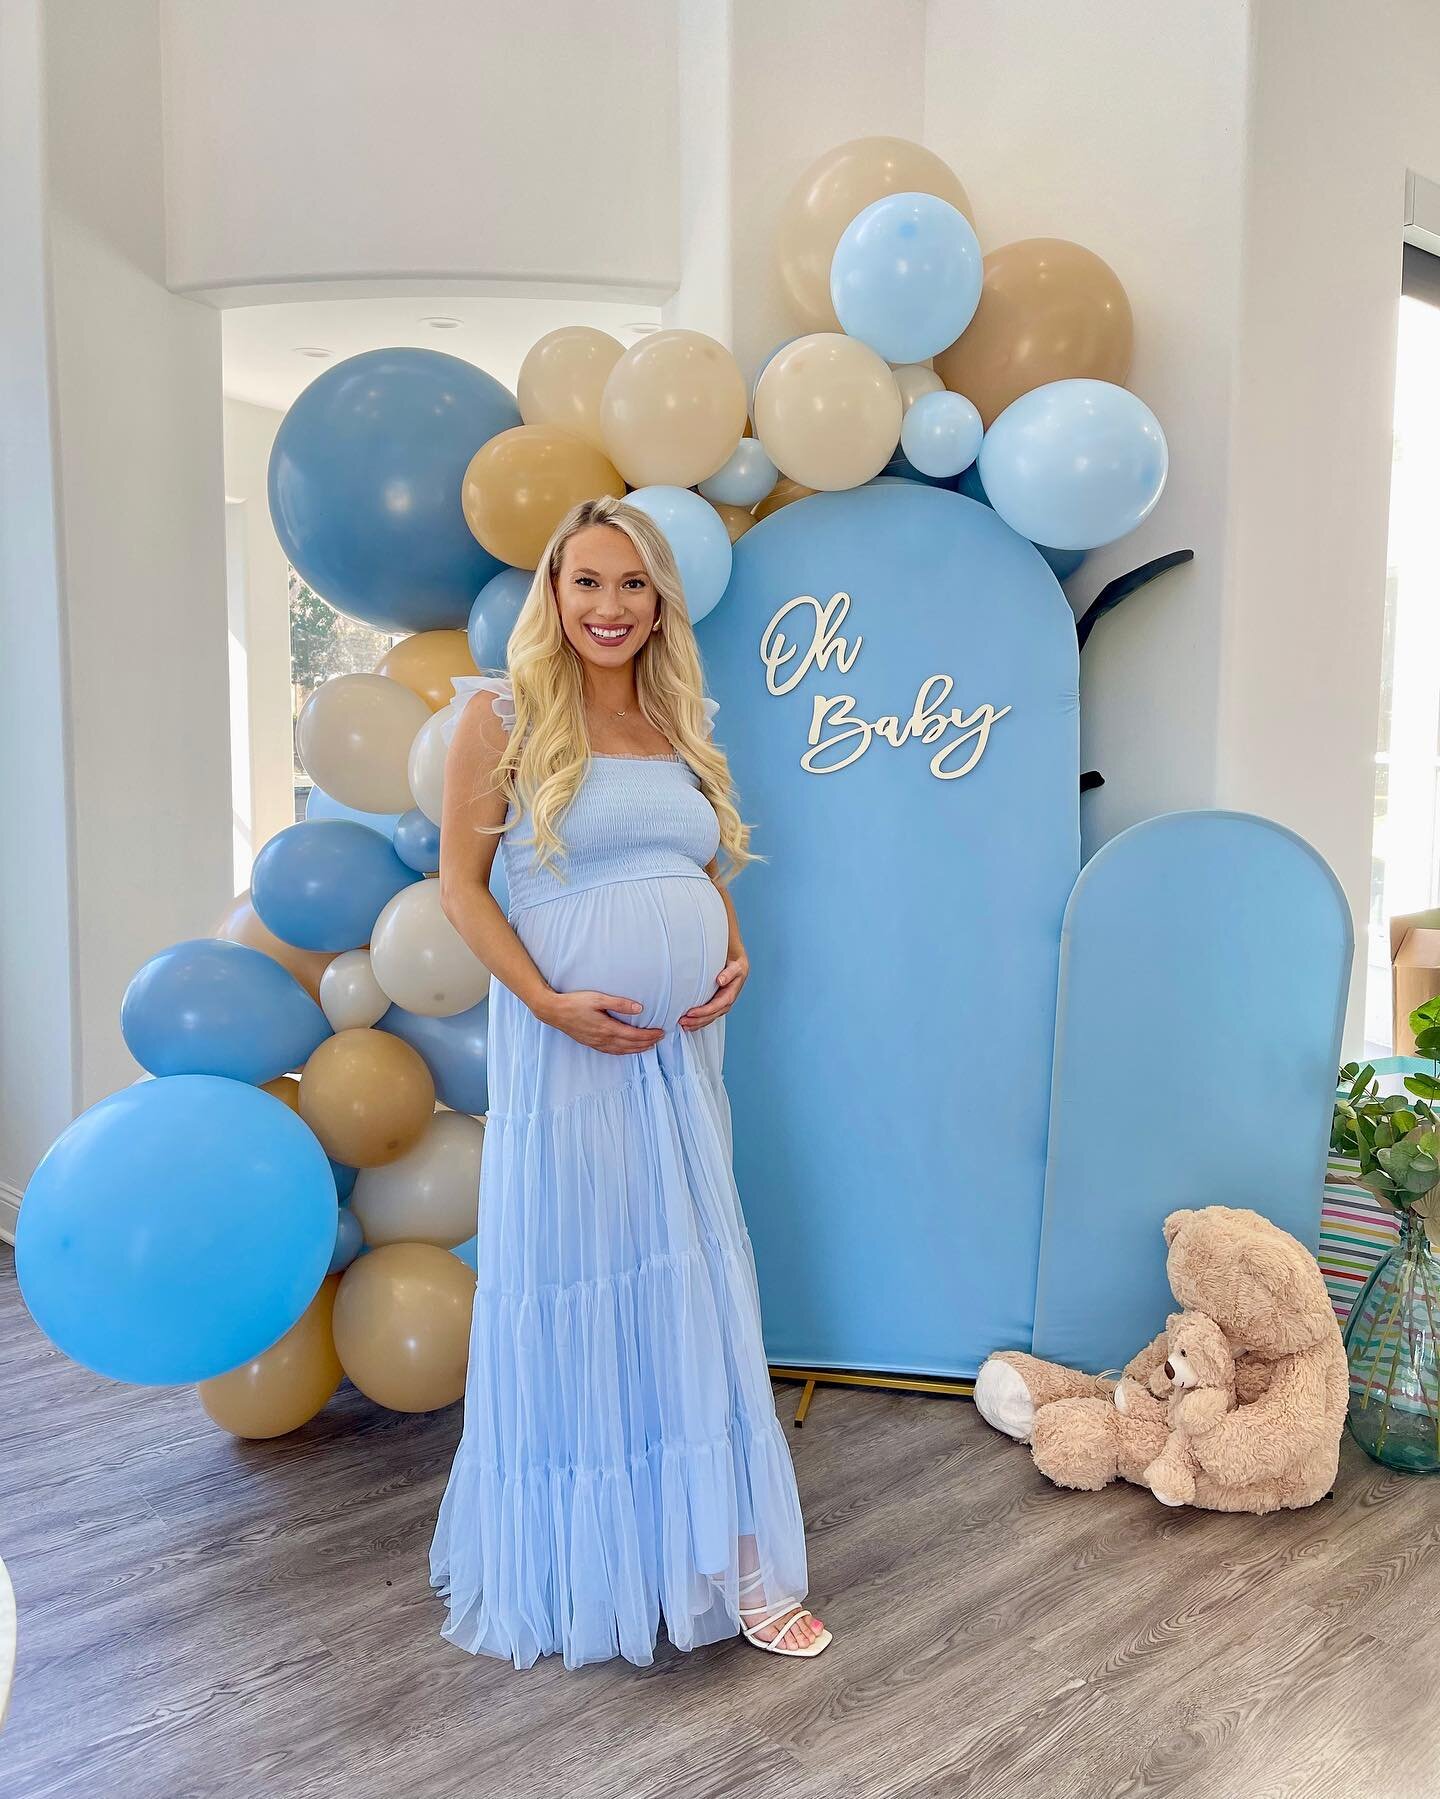 So thankful to have such amazing support surrounding baby Brooks 🤎🧸 5 more weeks until his due date!🎉 Thank you @taylorleighkessler &amp; @katinakearns for hosting the most beautiful baby shower for us! So thankful for all my girls 💕 

Bump frien